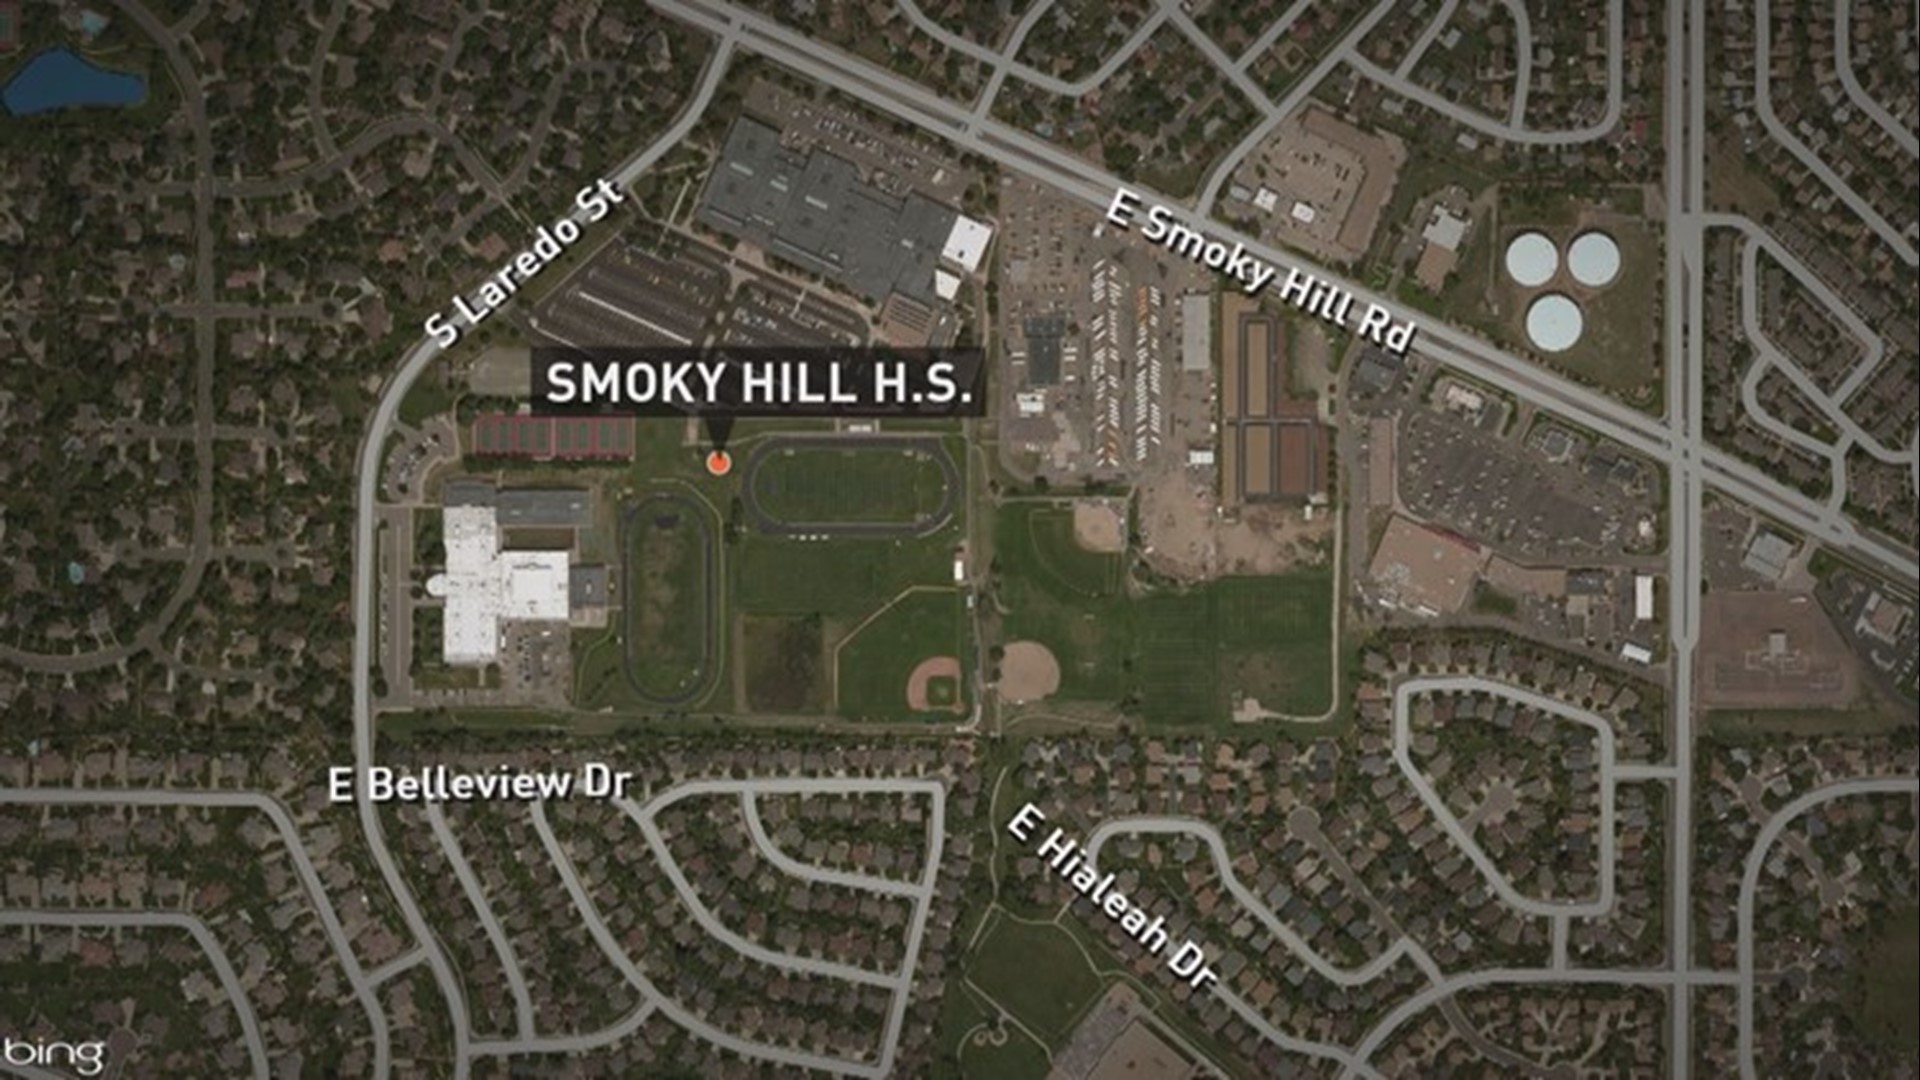 Wrestling coach at Smoky Hill High School fired after incident